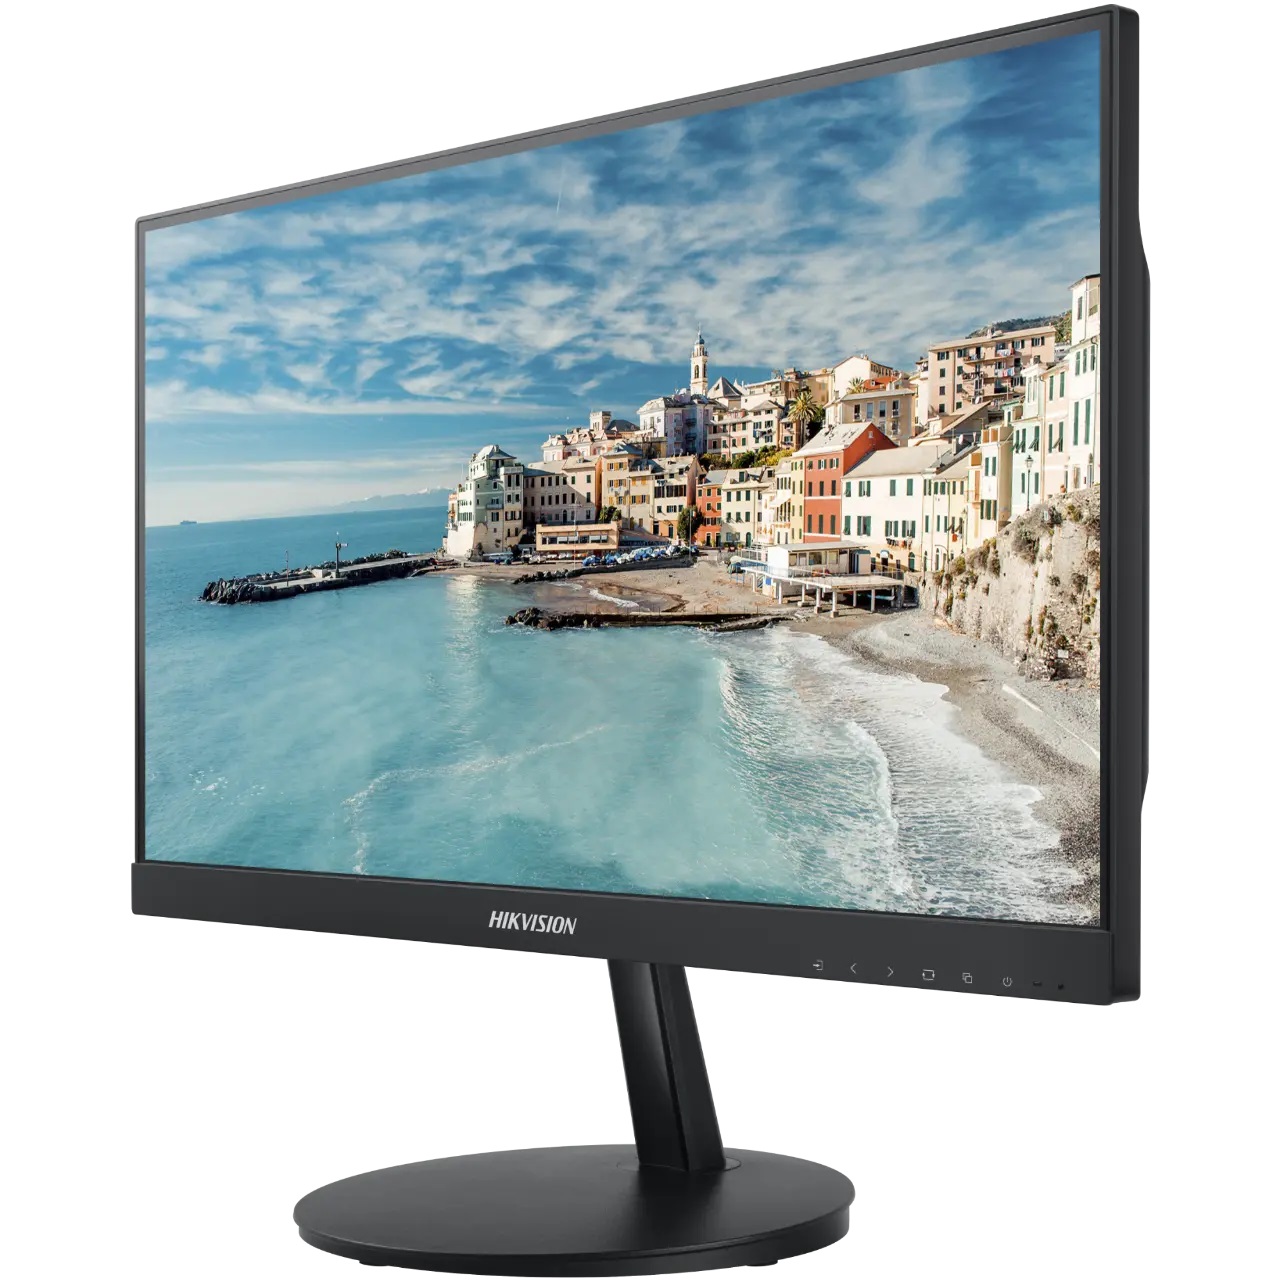 HIKVISION DS-D5022FN-C Monitor 22